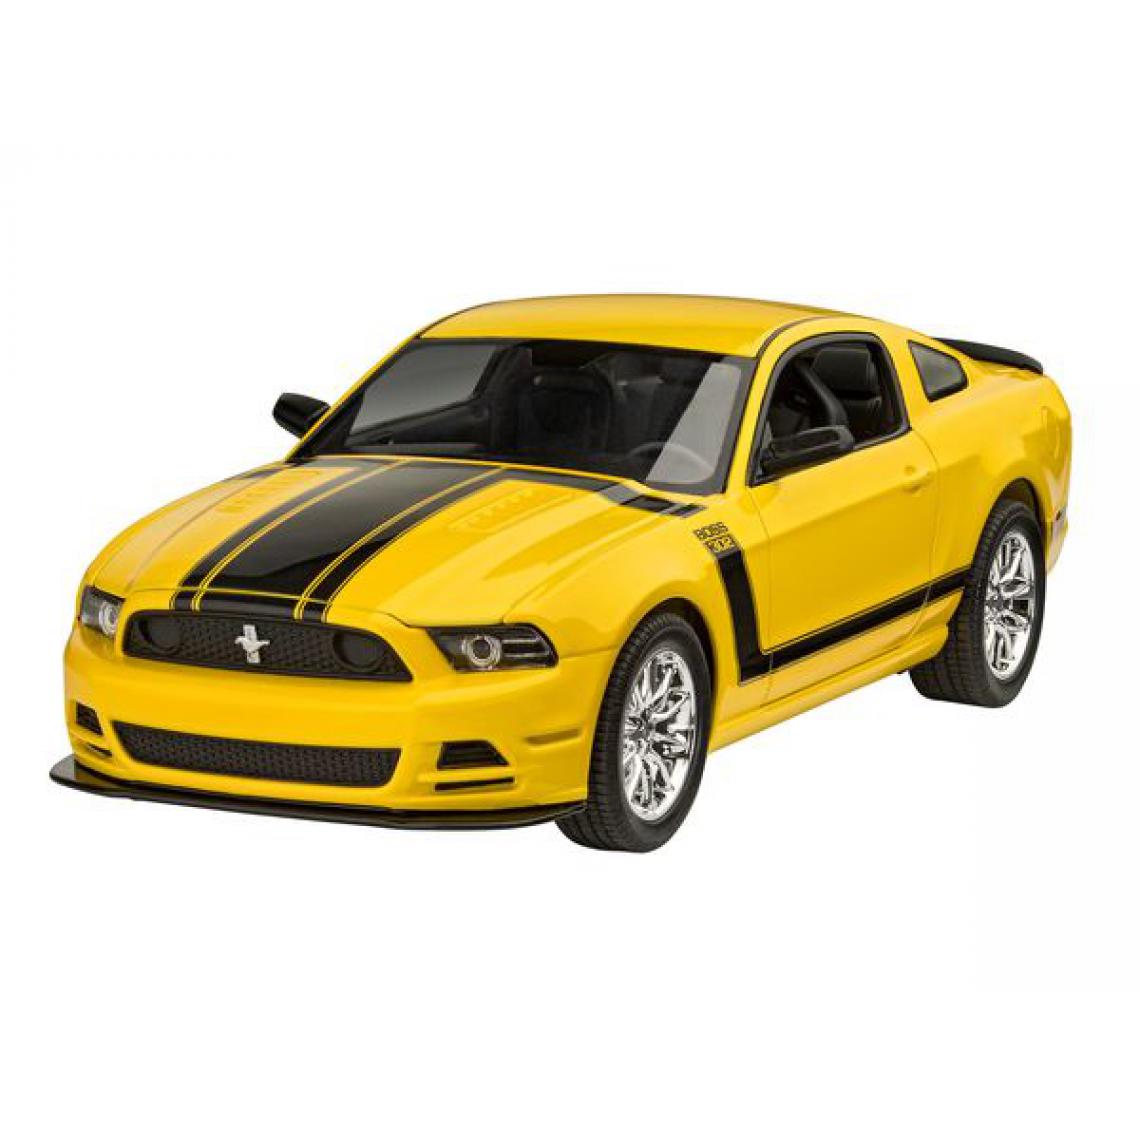 Revell - 2013 Ford Mustang Boss 302 - 1:25e - Revell - Accessoires et pièces